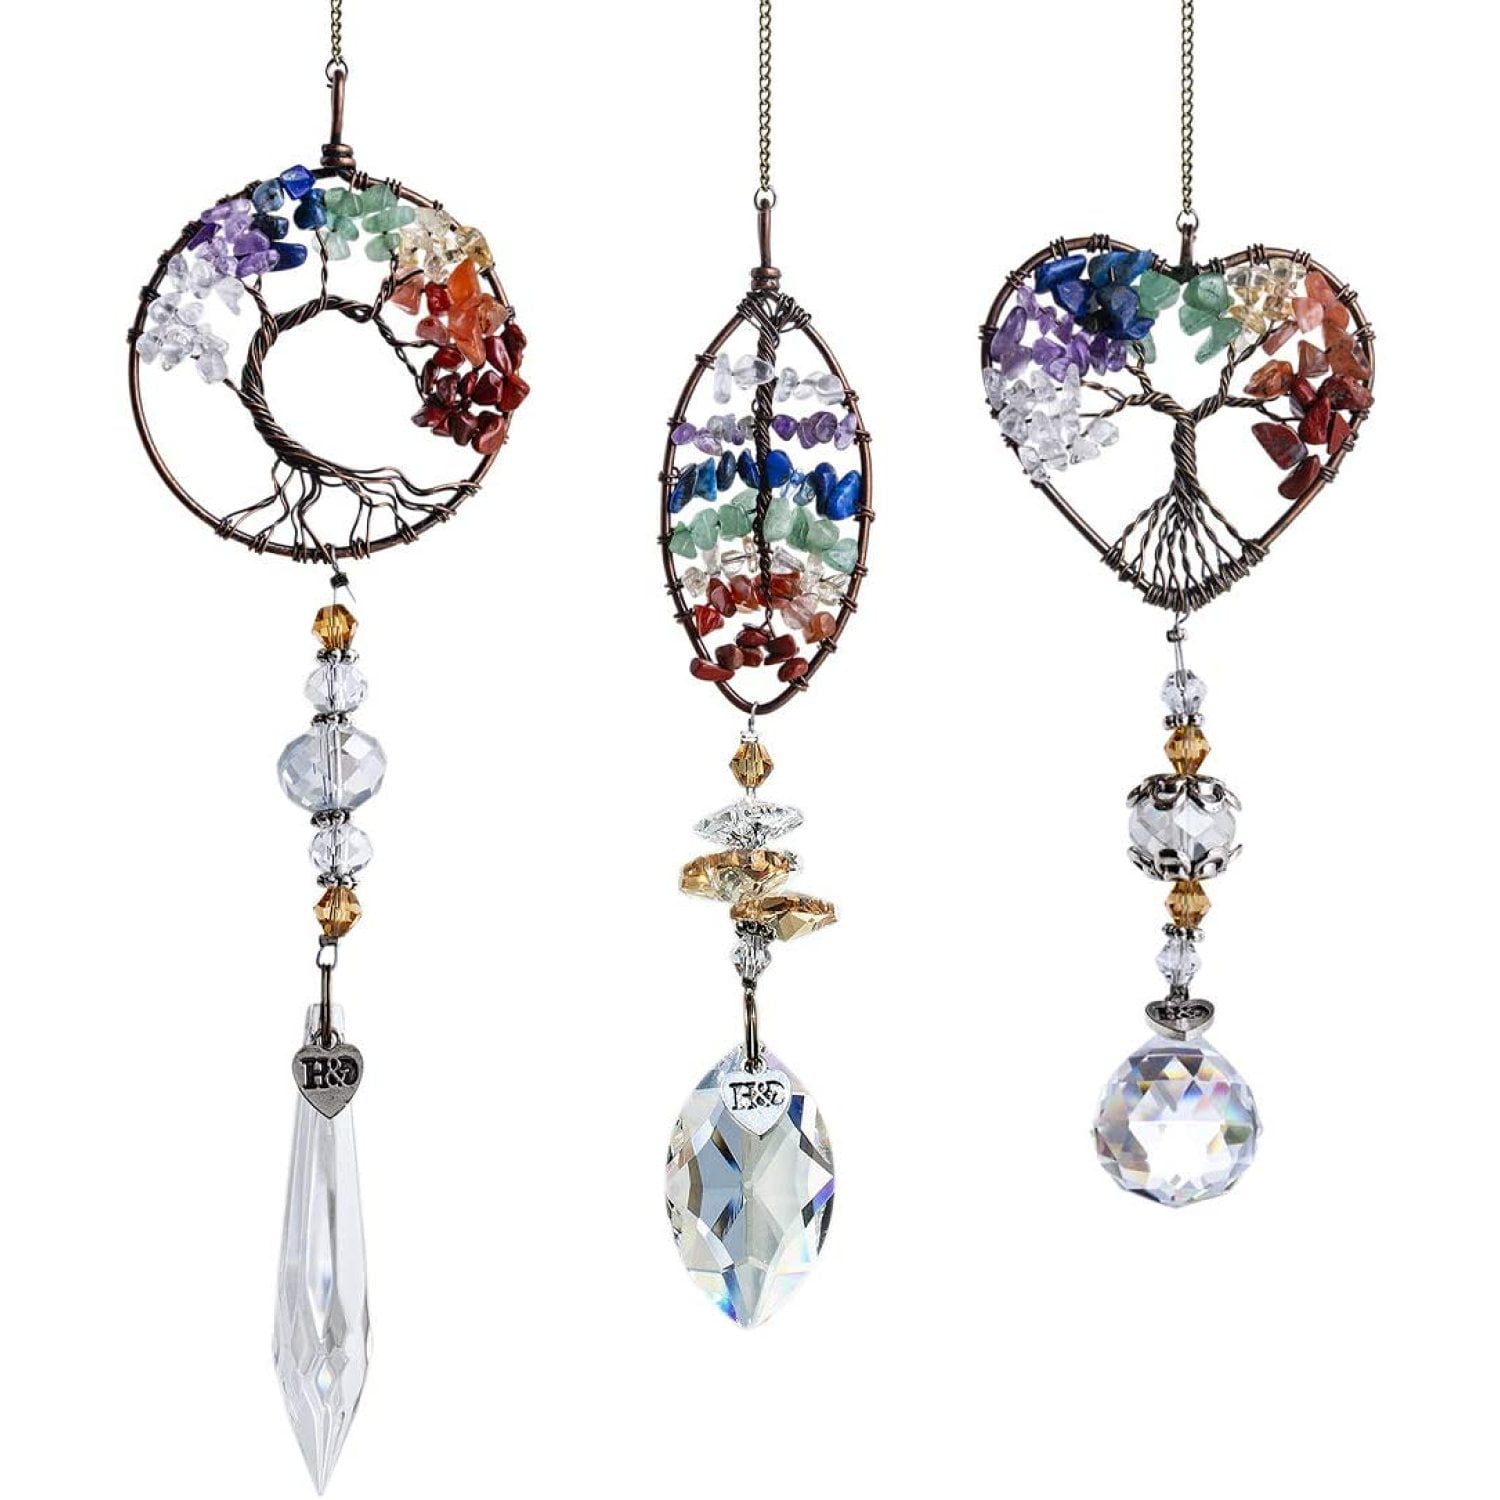 Details about   Crystal Butterfly Prisms Ball Home Party Hanging Ornament Car Pendant Decor 